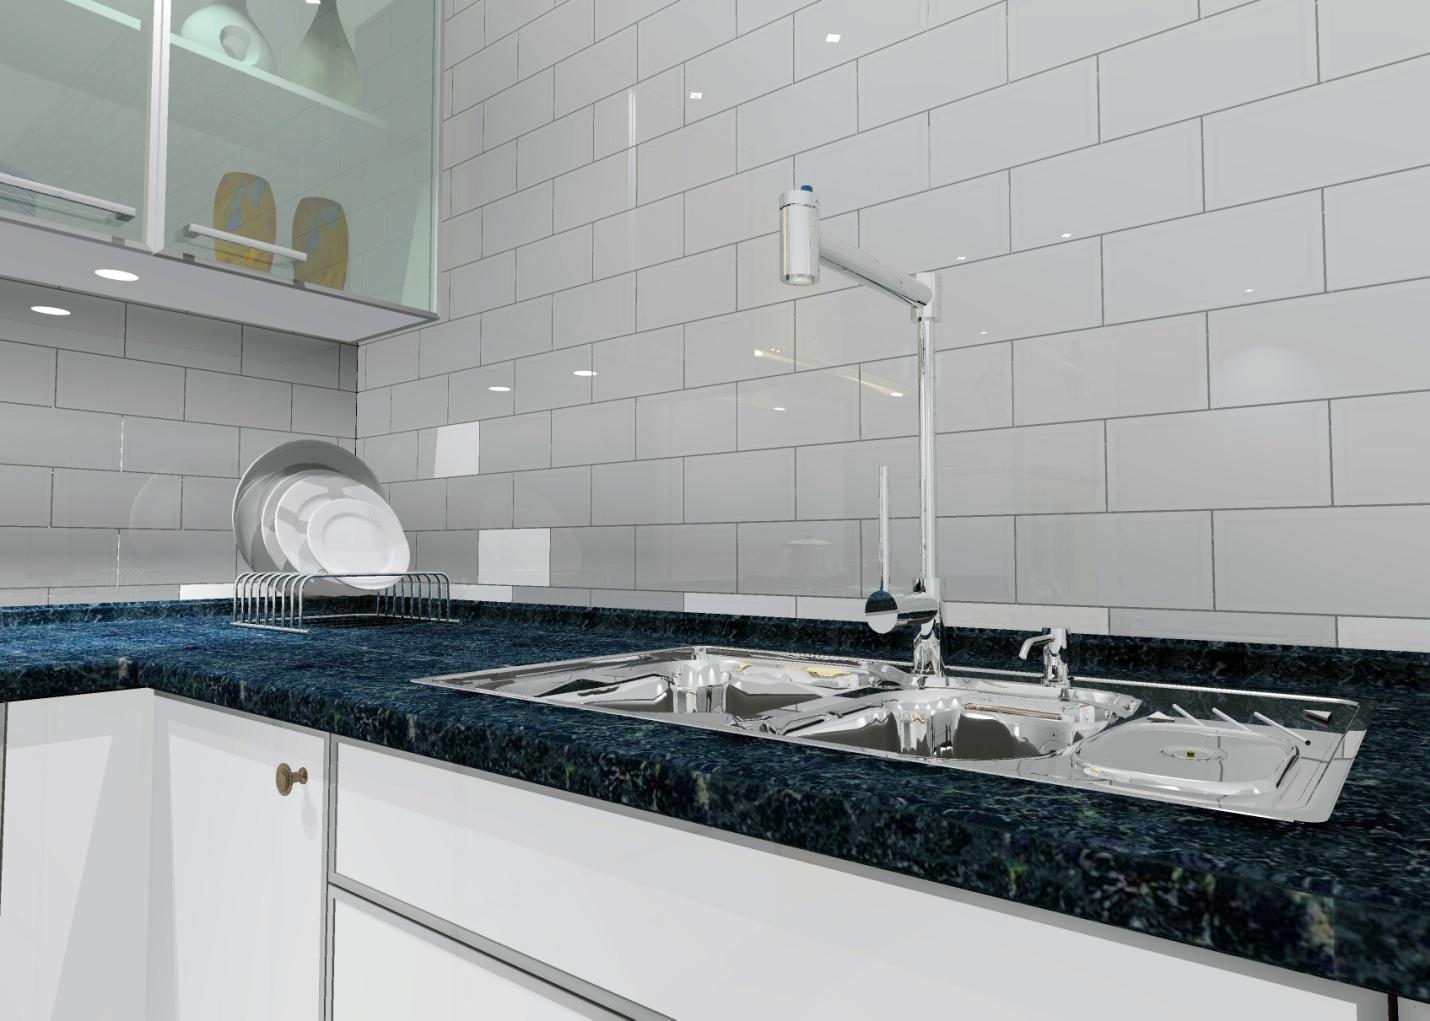 Porcelain Vs Granite Tiles In The, How Much Does A Granite Vanity Top Cost In Philippines